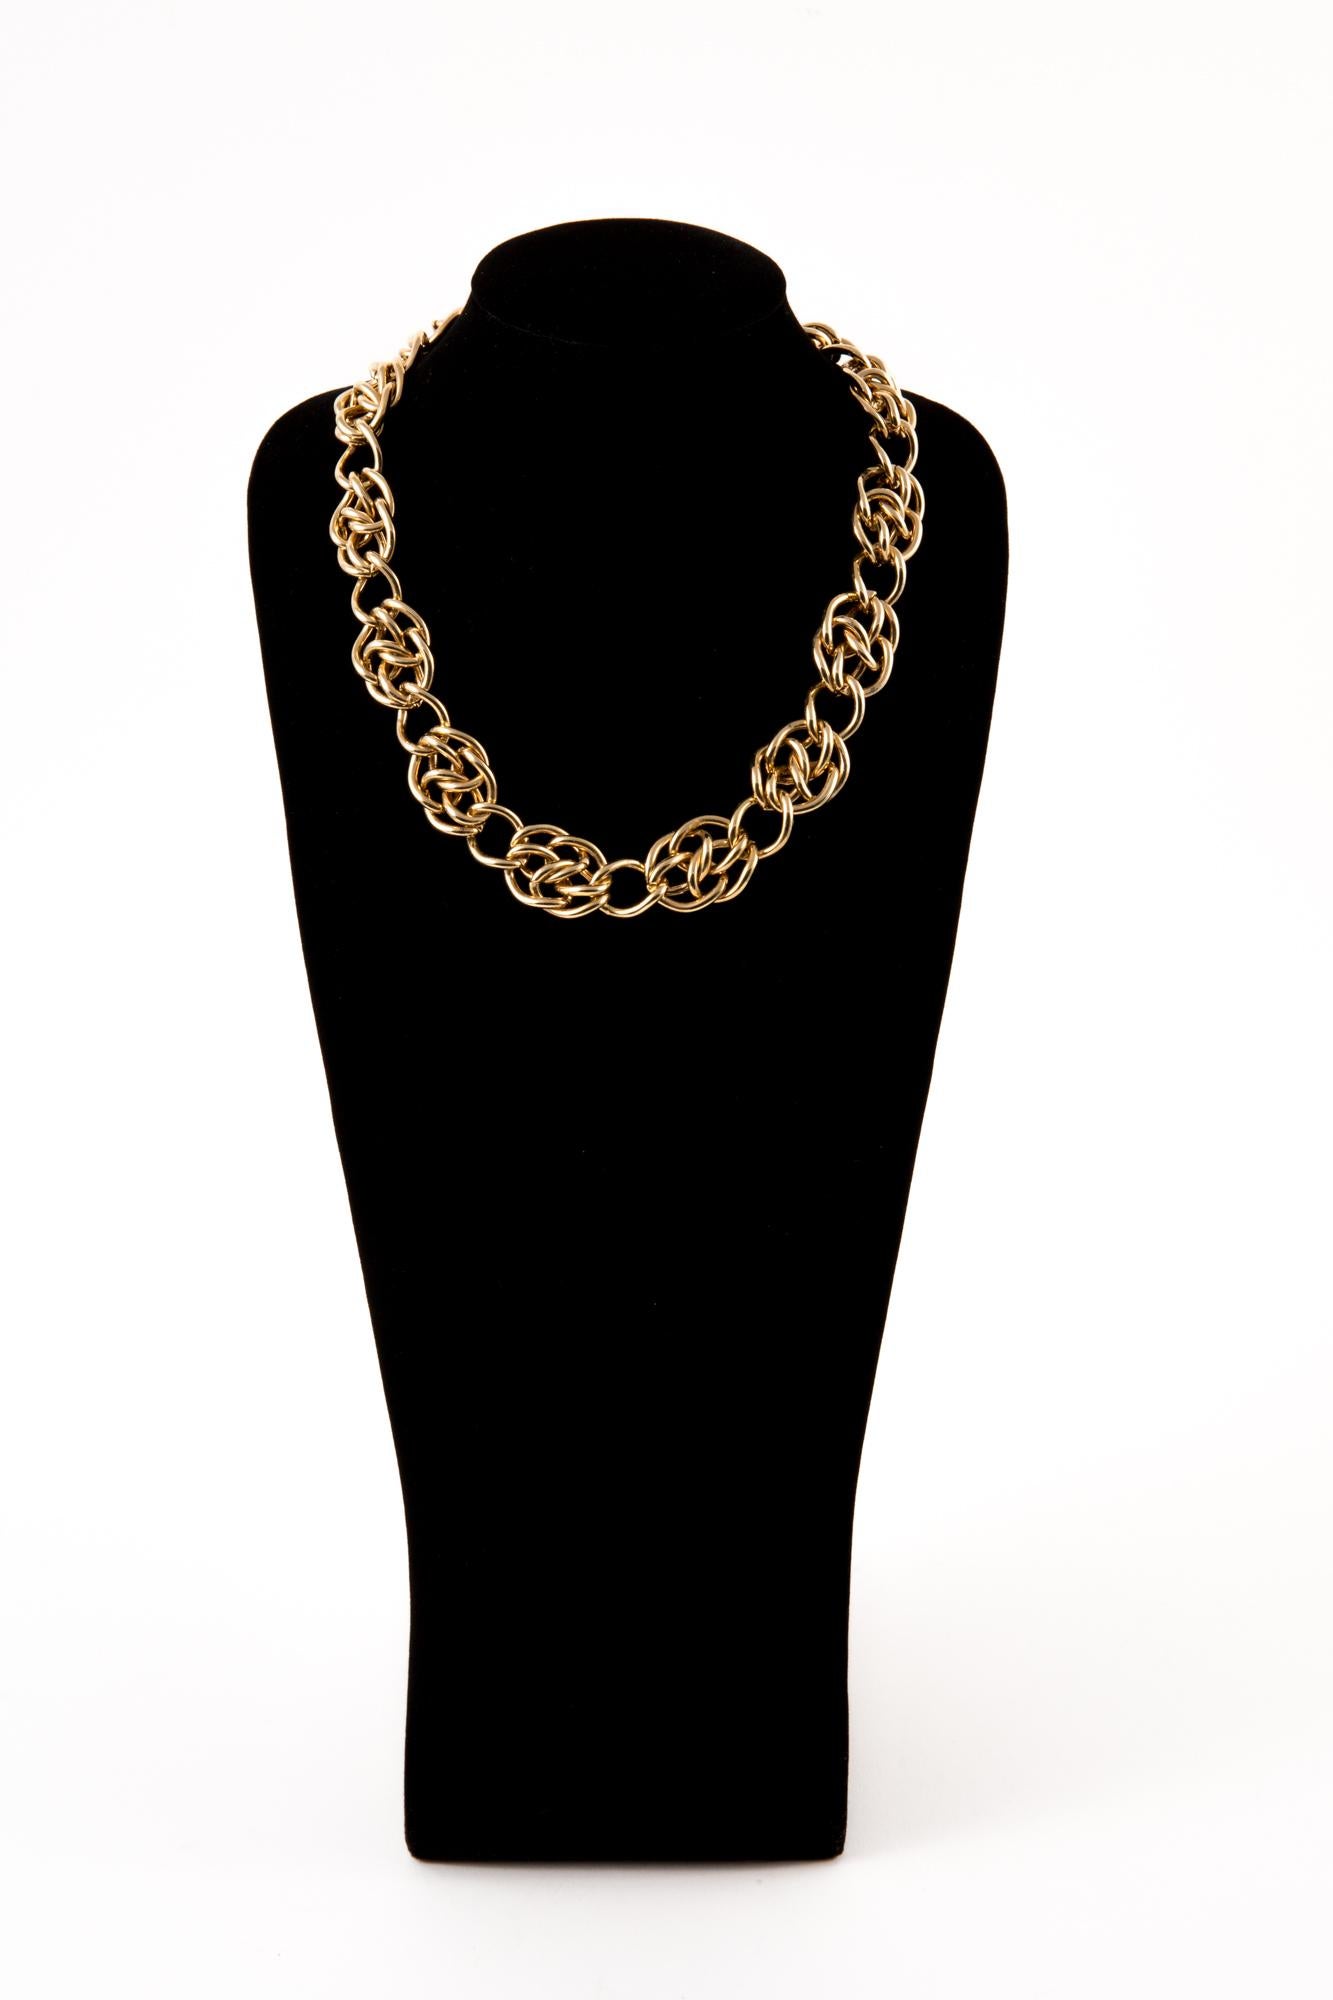 1980s Monet gold-tone chain choker necklace featuring a back round magnet fastening, pitted at back round opening. 
Length 18.1in. (46cm)  
In excellent vintage condition.  Made in US.
We guarantee you will receive this gorgeous earrings as